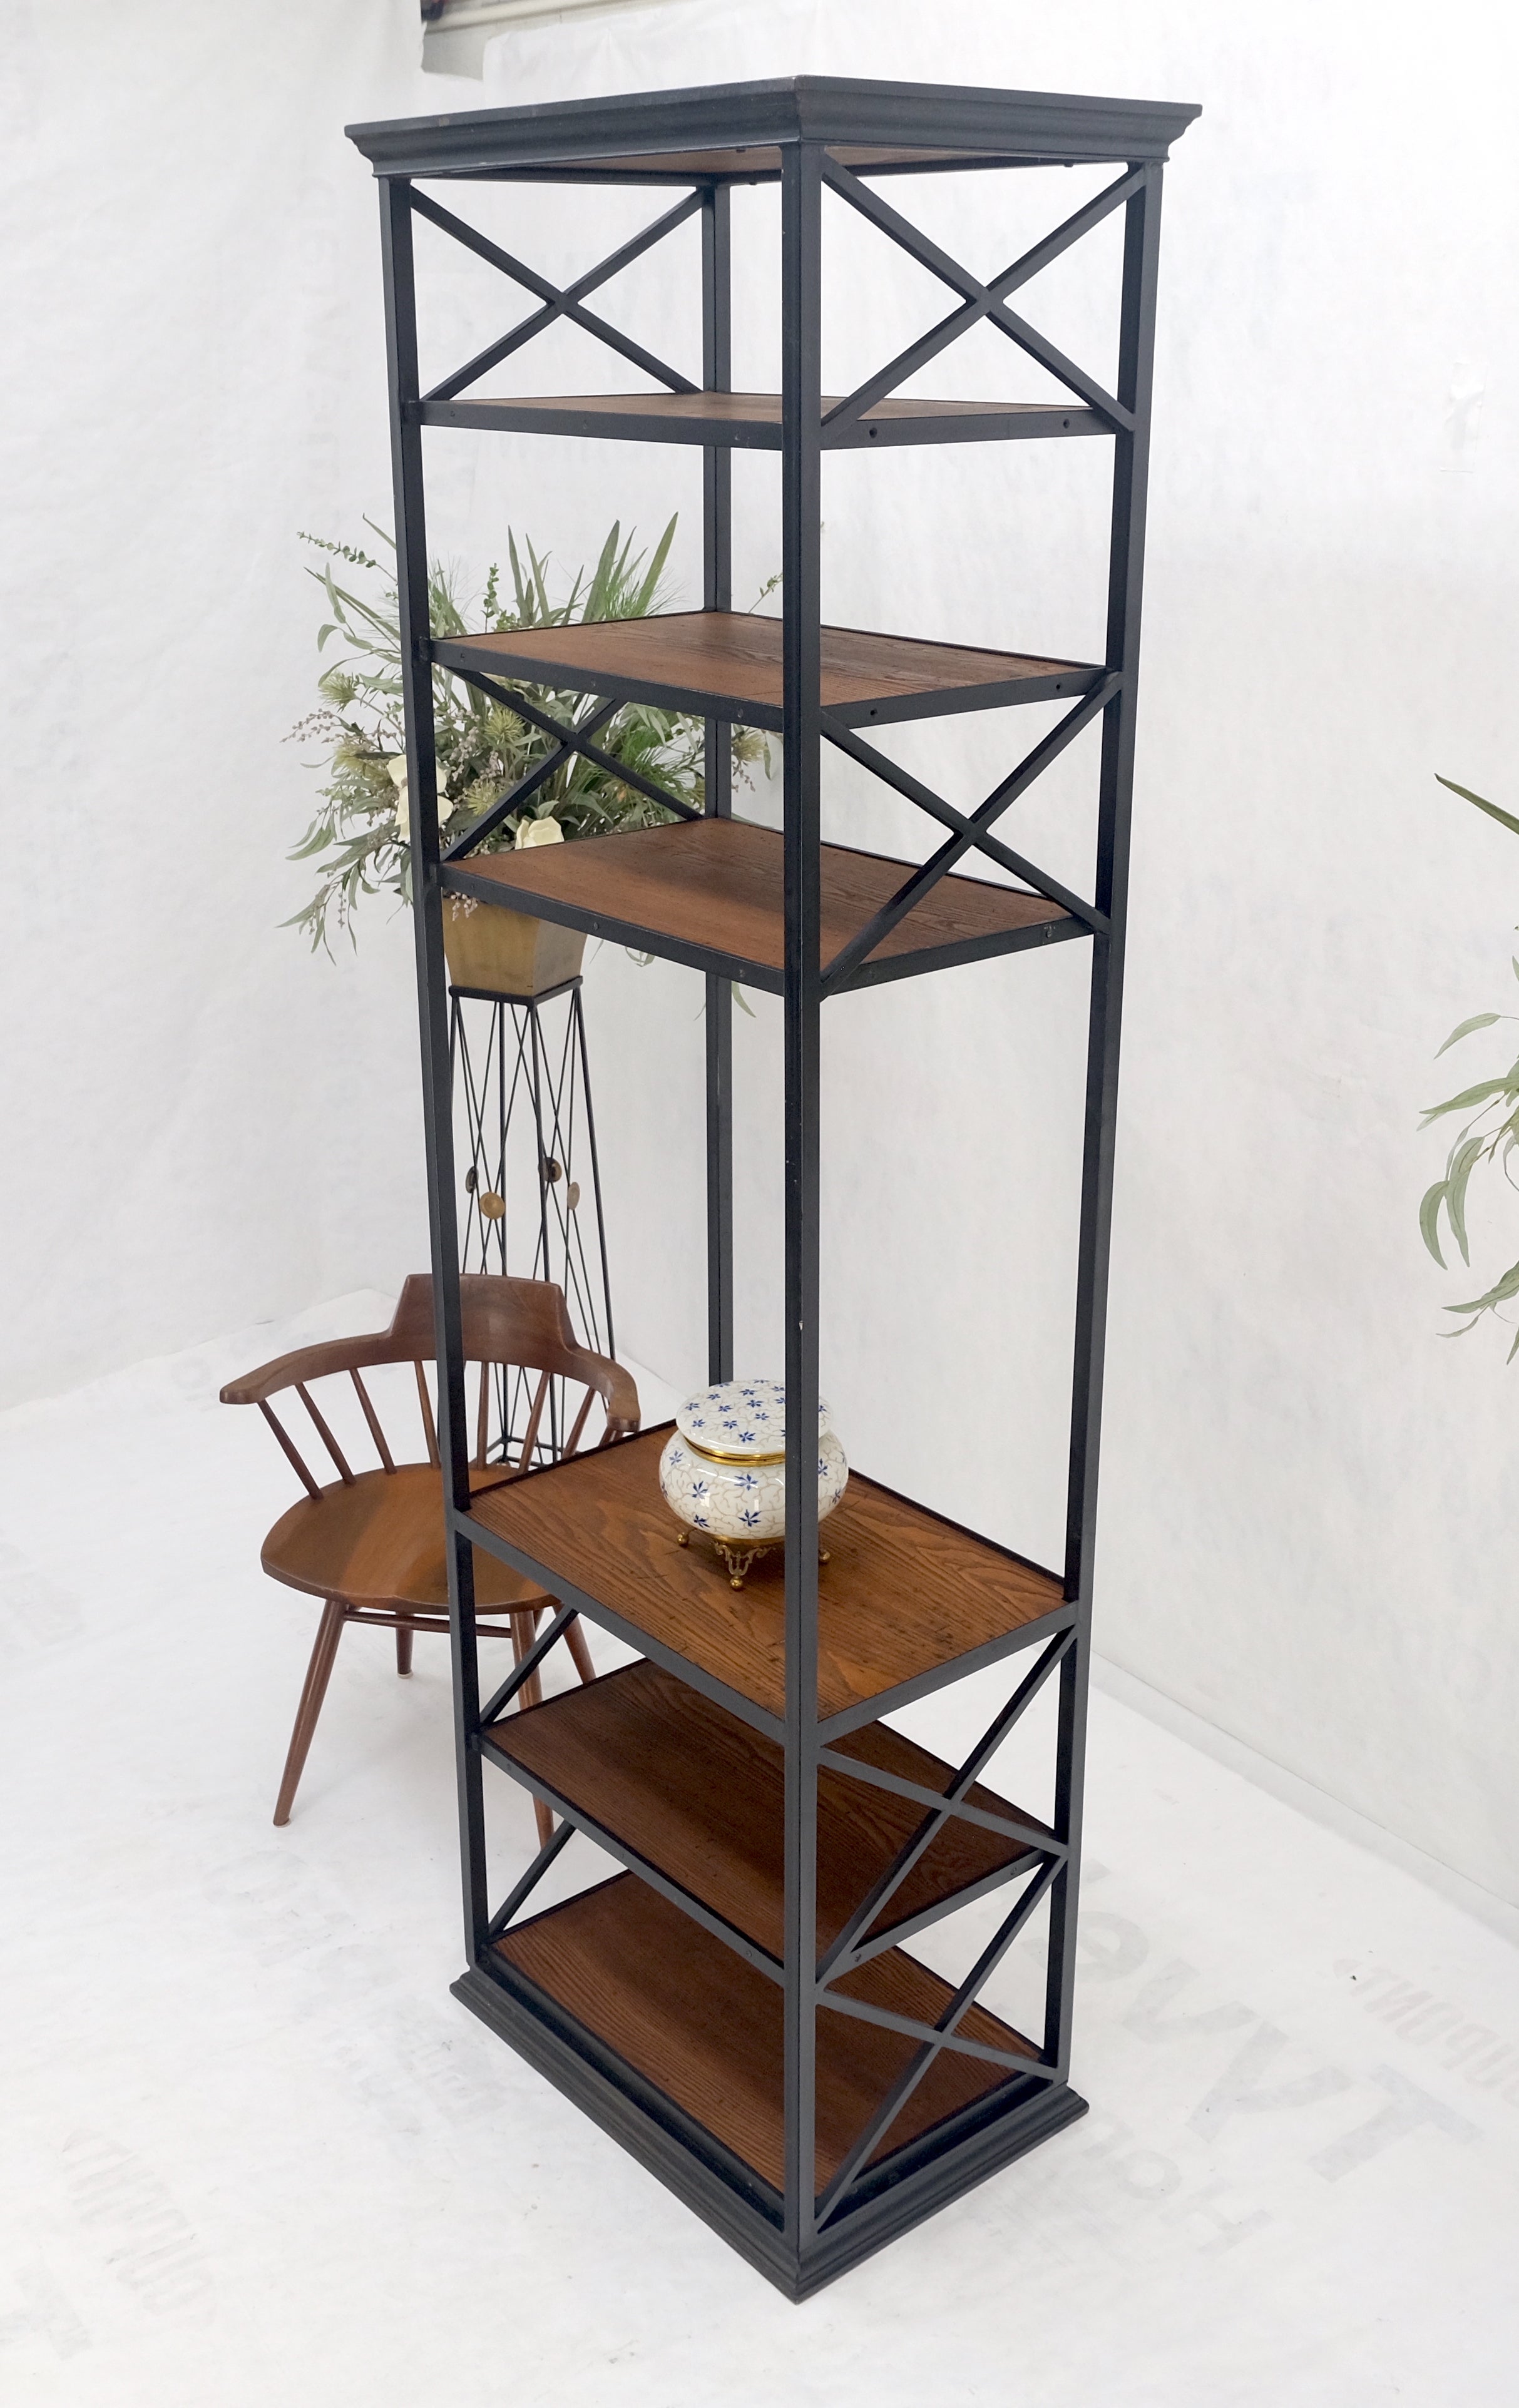 Black Steel & Wormy Chestnut Shelves 8 Foot Tall Etagere BookCase Display MINT!